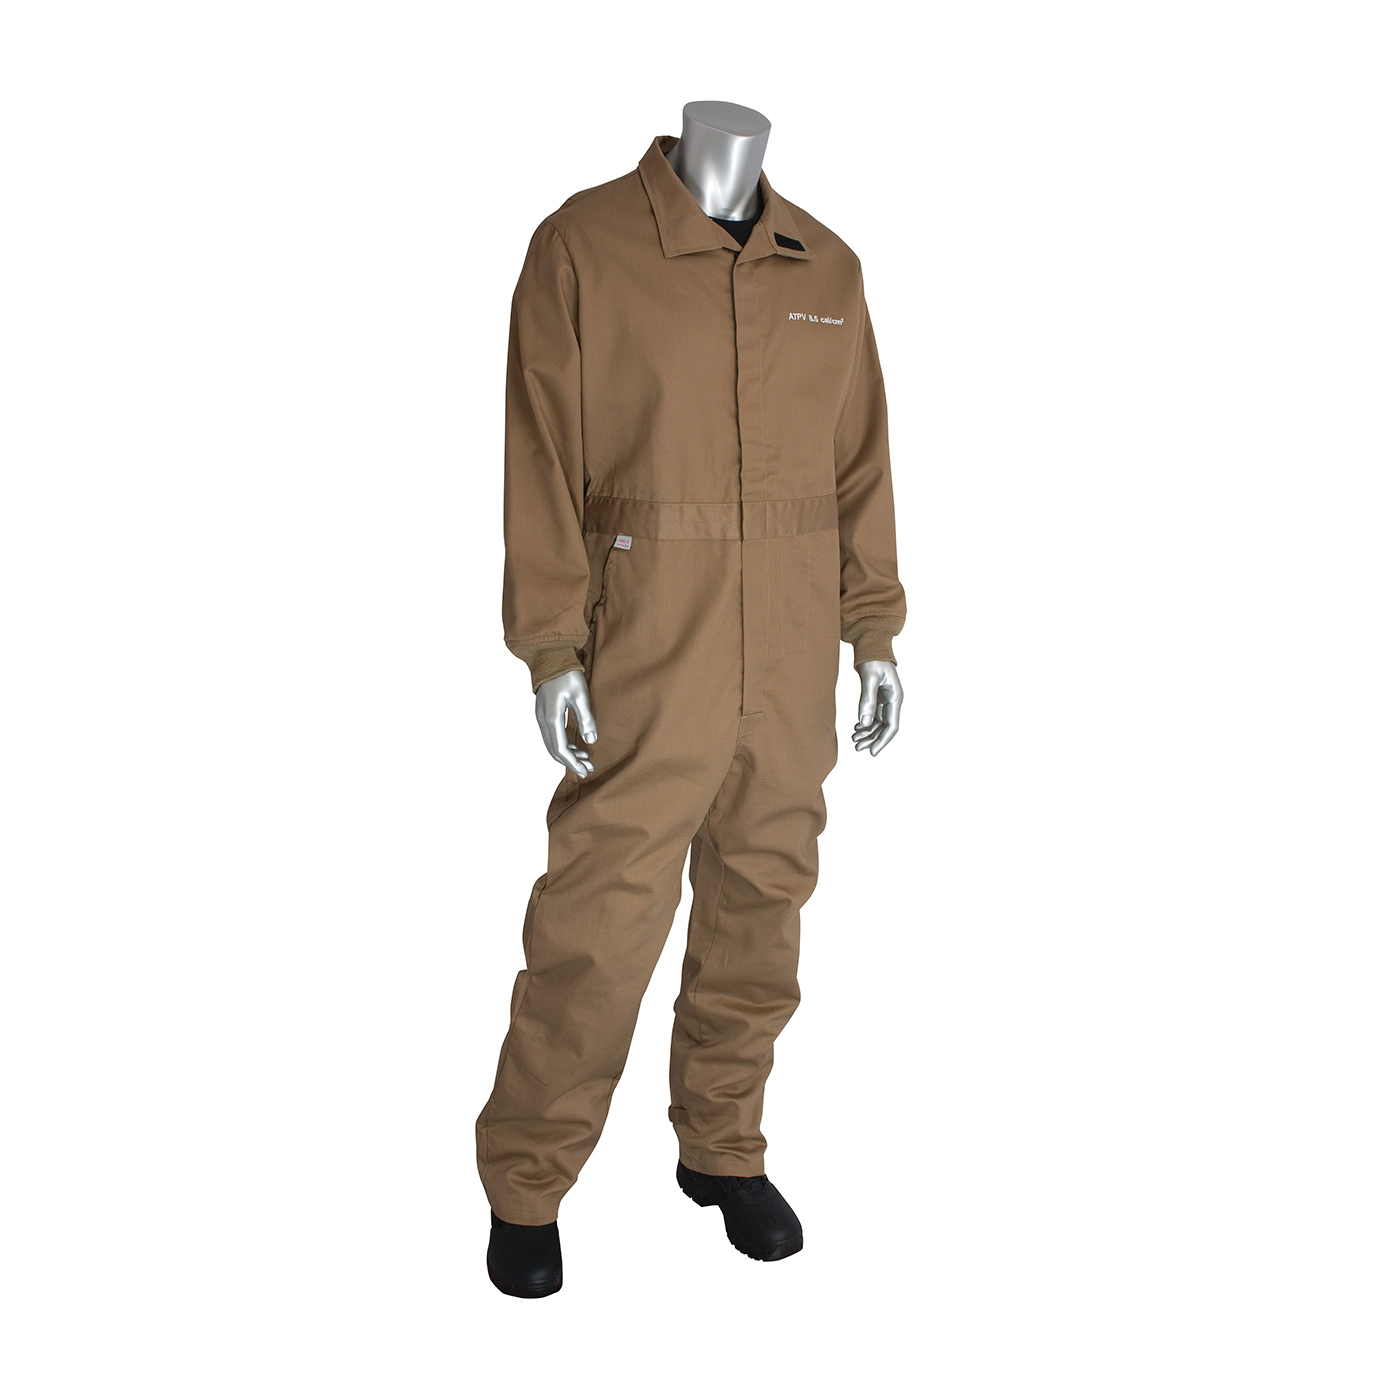 PIP® 9100-2100D/L Flame Resistant Coverall With Vented Back, L, Khaki, 90% Cotton/10% Nylon/FR Twill Weave, 44 to 46 in Chest, 32 in L Inseam